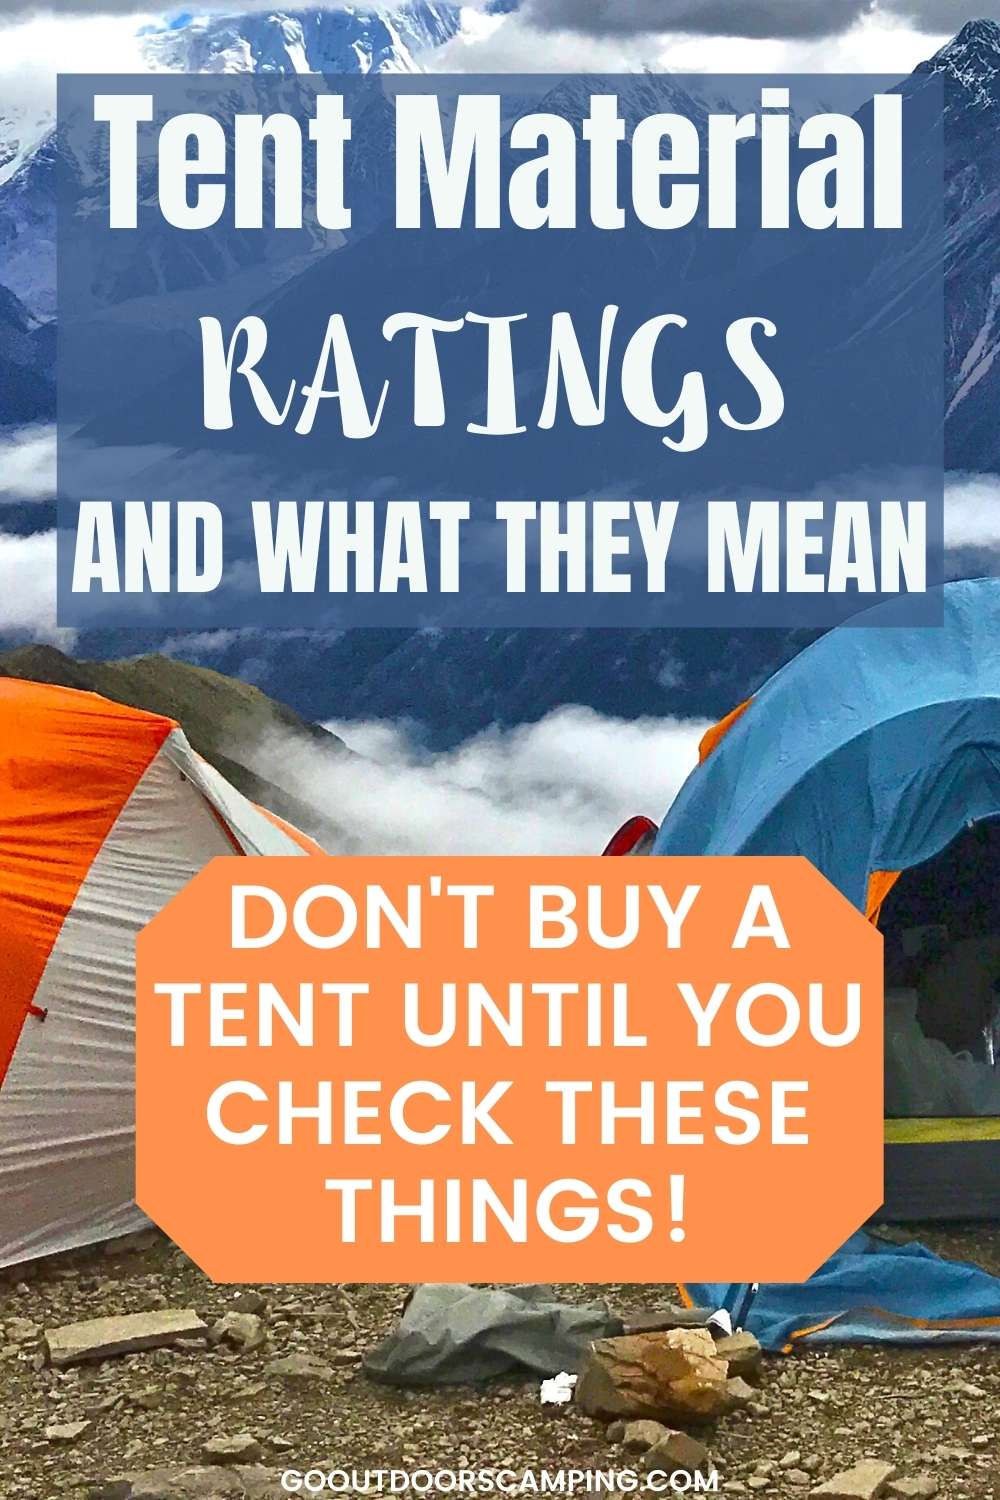 tent material ratings and what they mean - know before you buy a tent